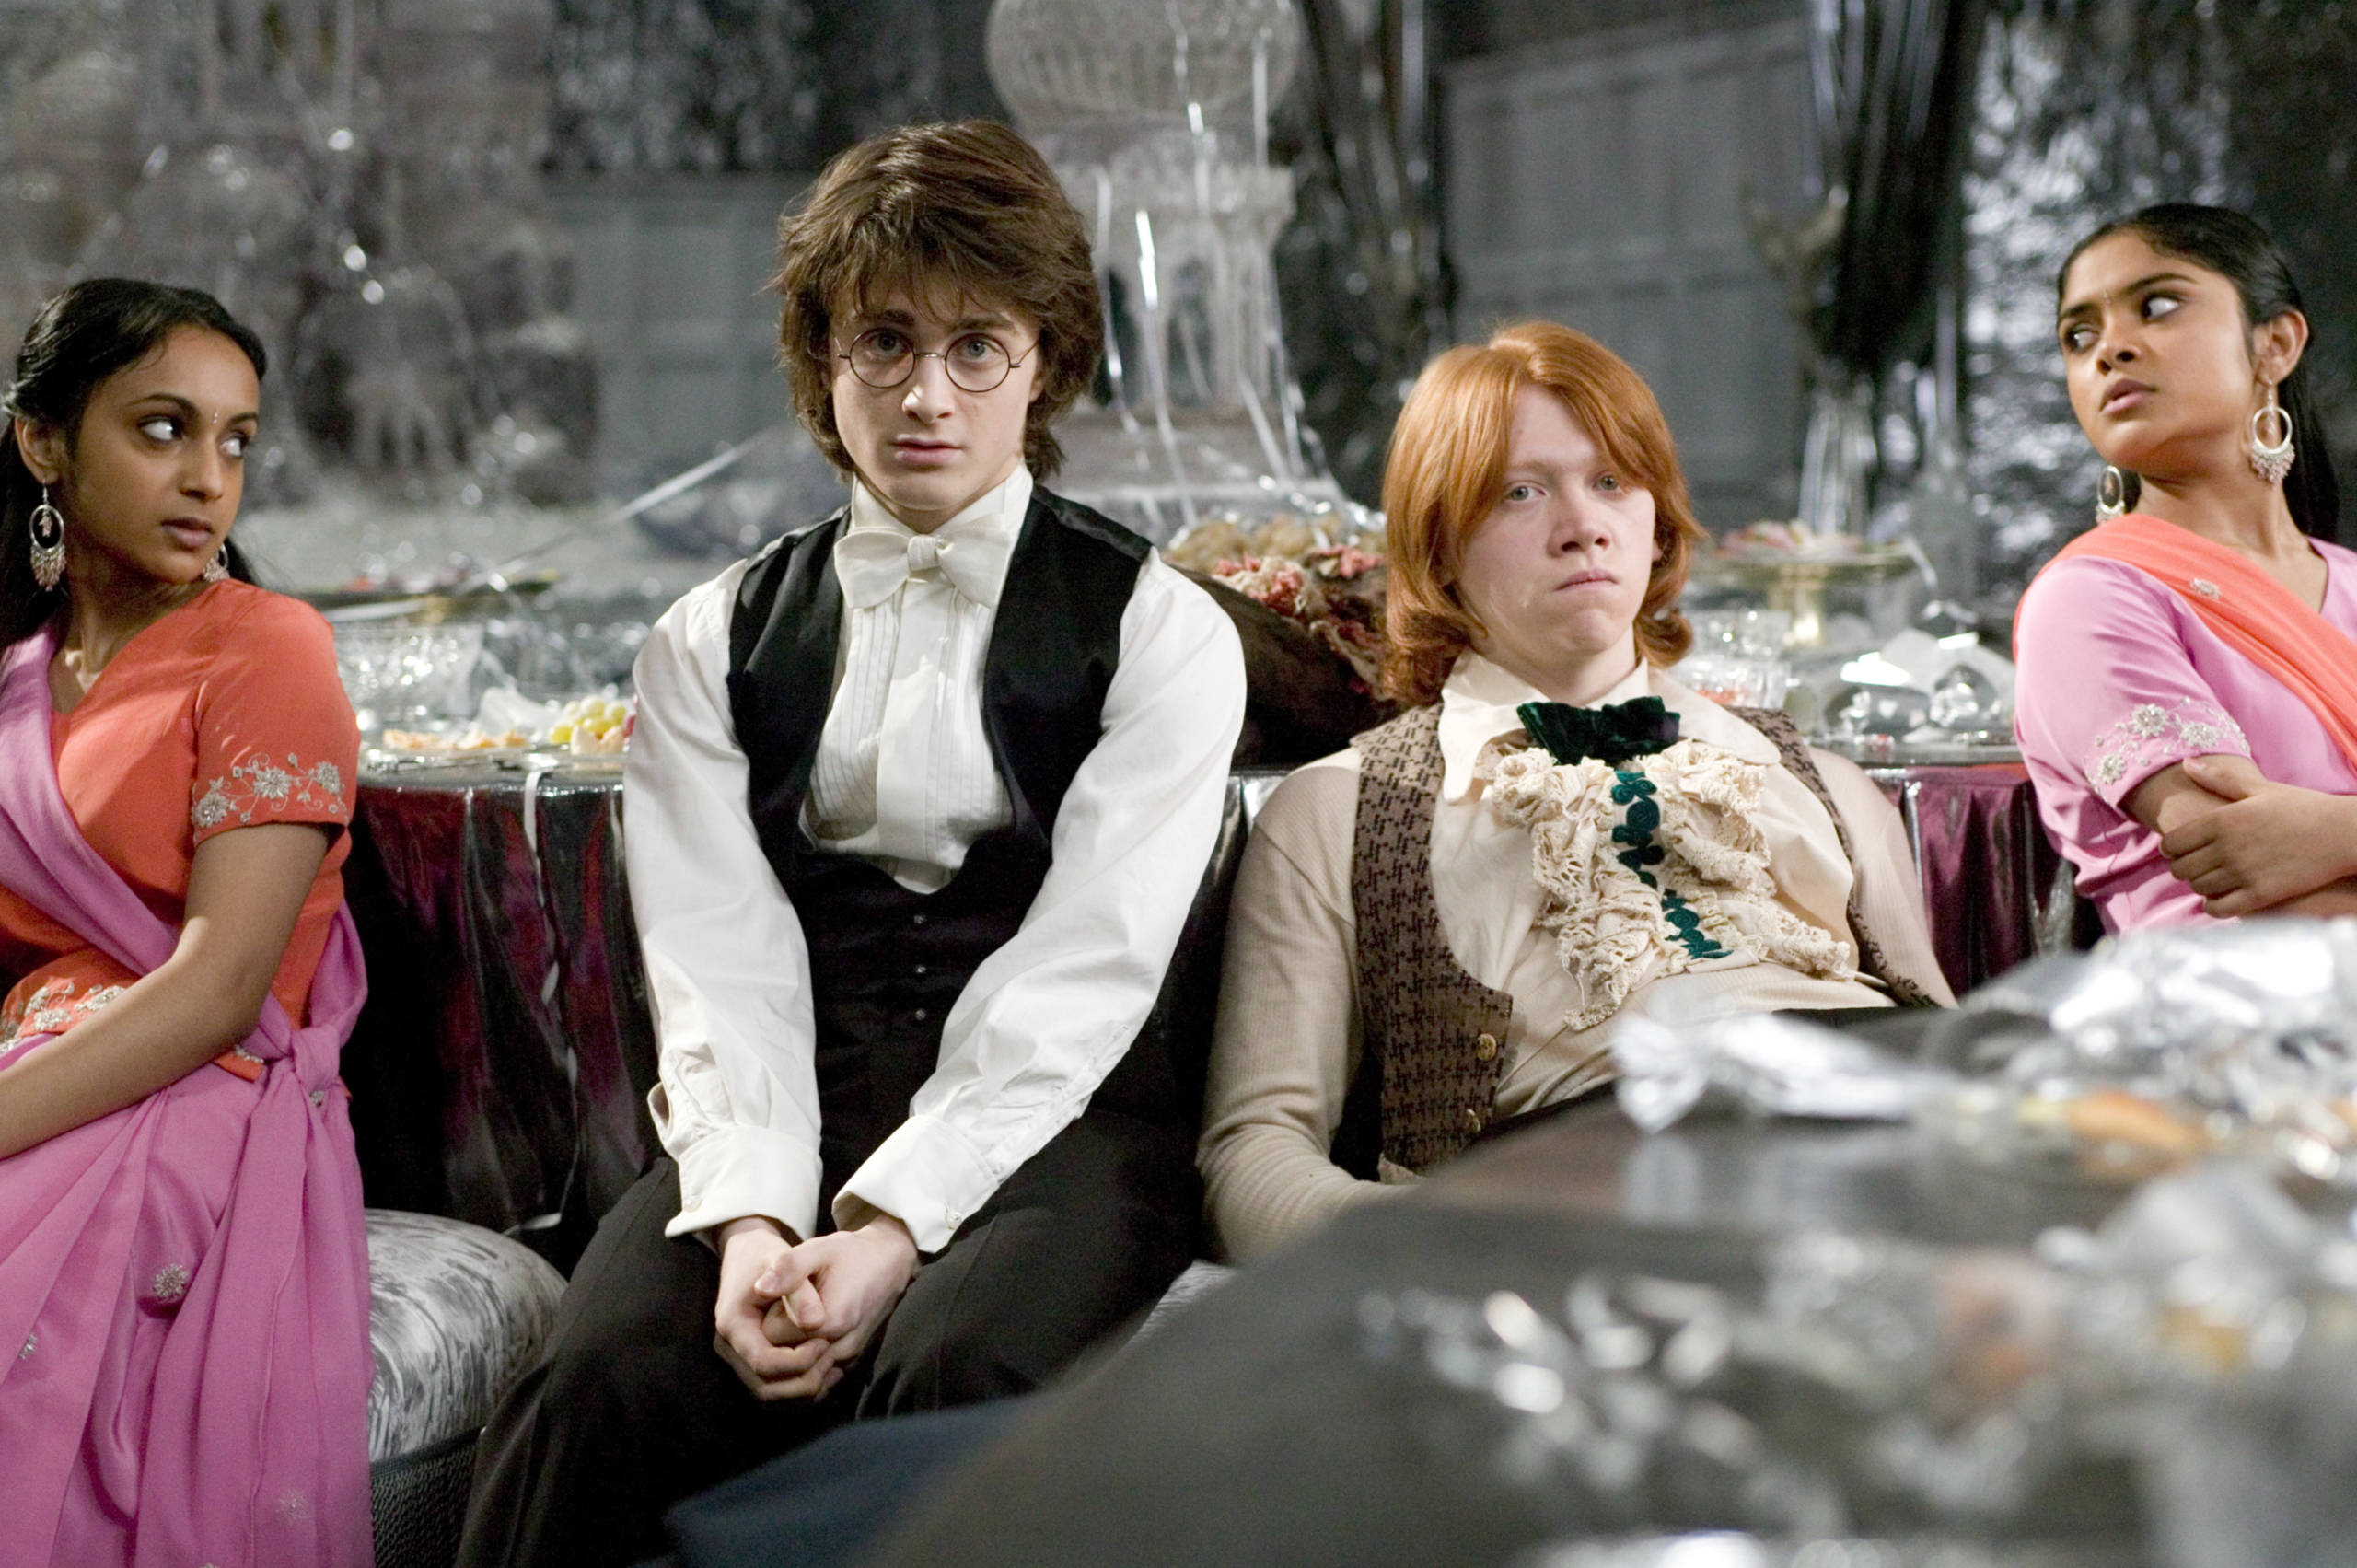 Harry and Ron left out at the Yule Ball in Goblet of Fire 